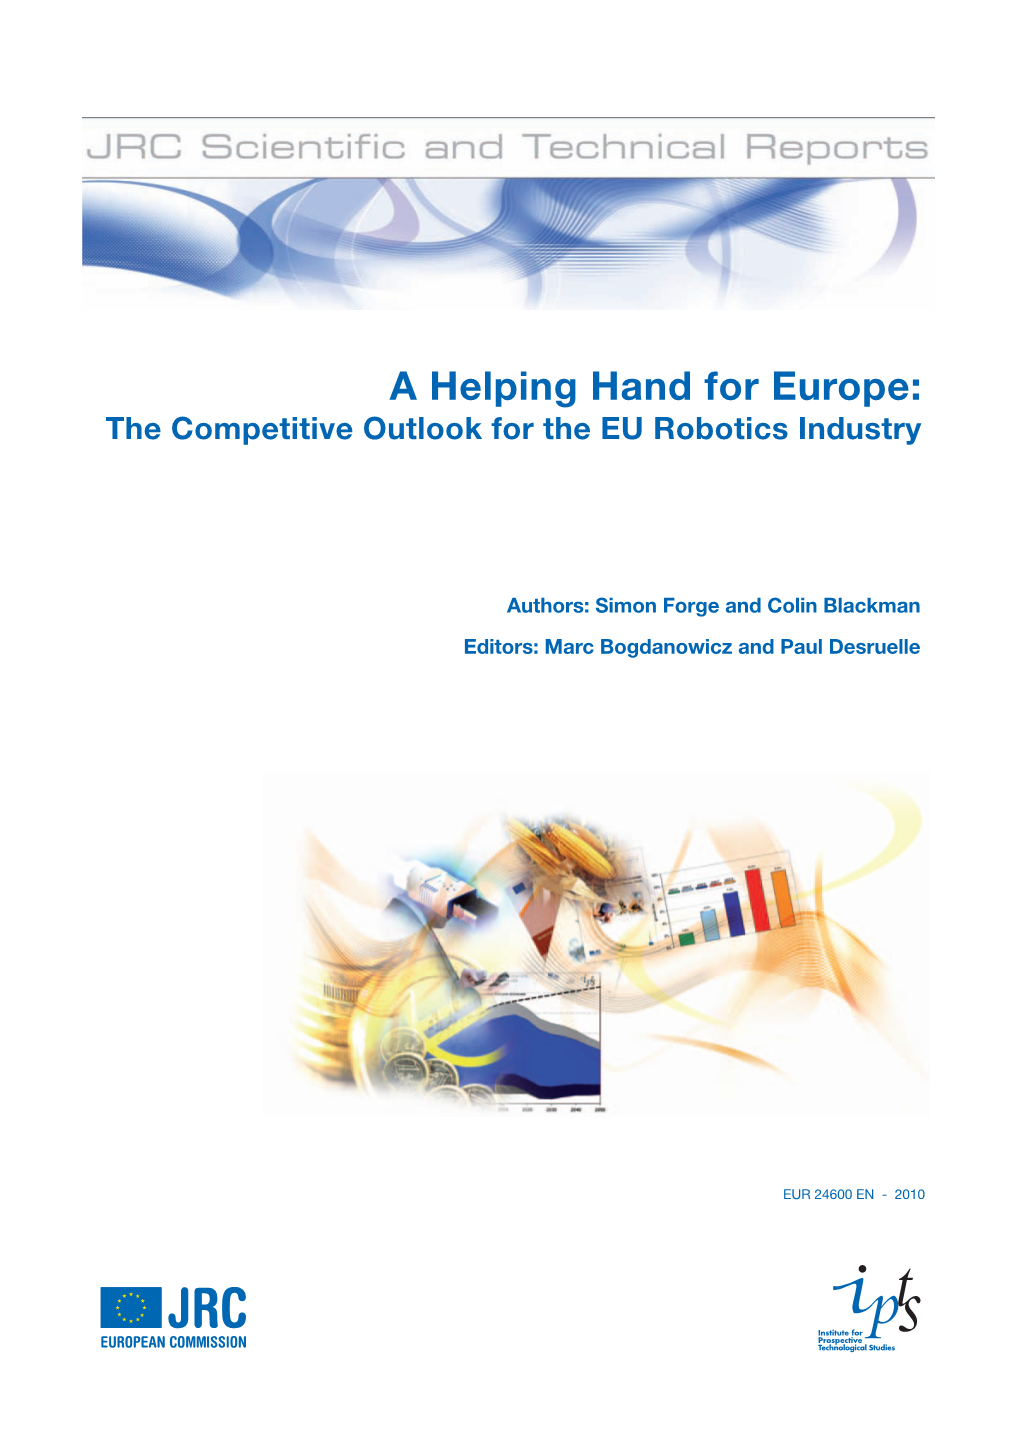 A Helping Hand for Europe: the Competitive Outlook for the EU